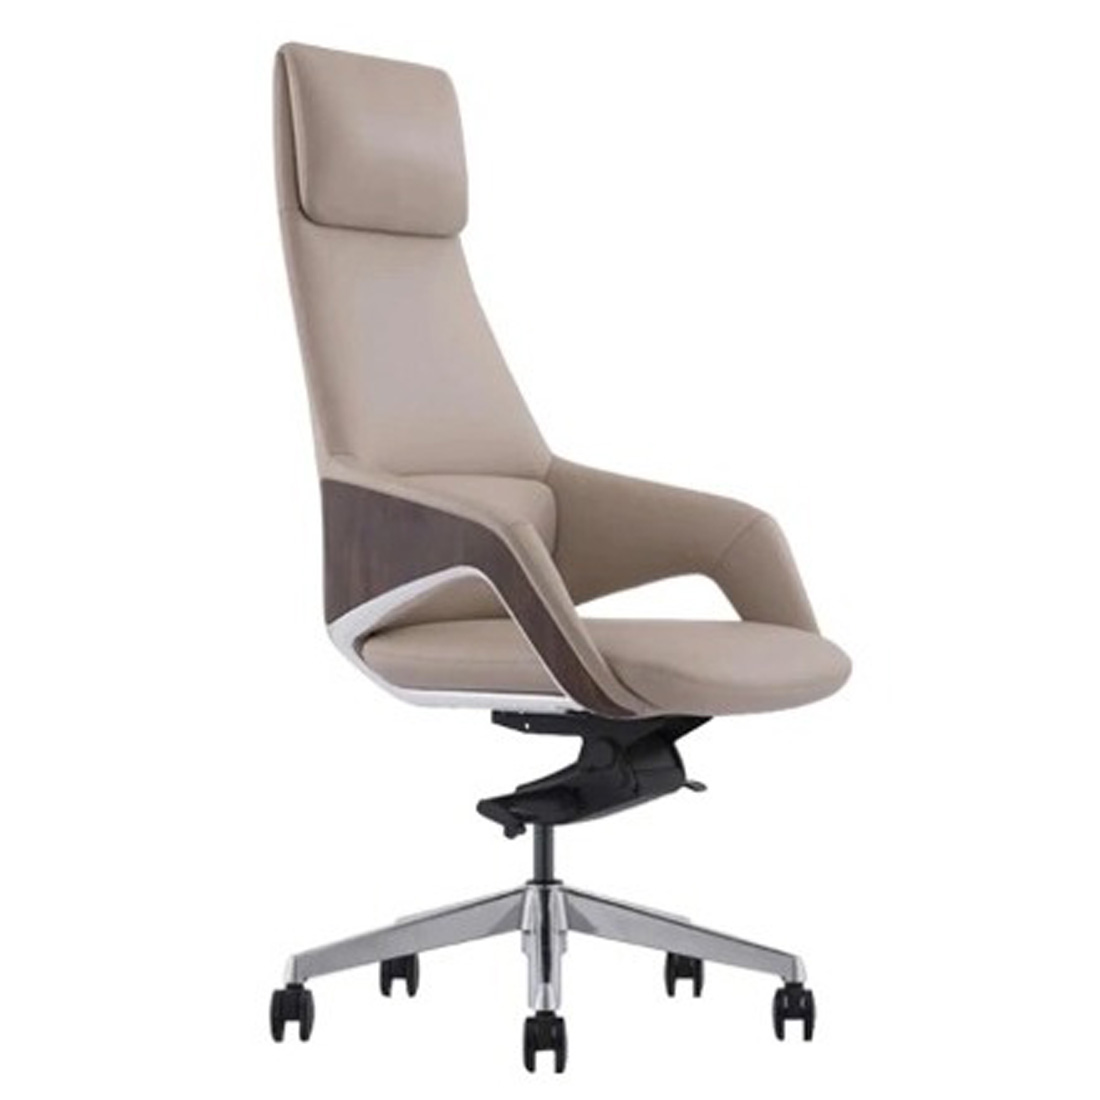 Light Brown Color Office Chair